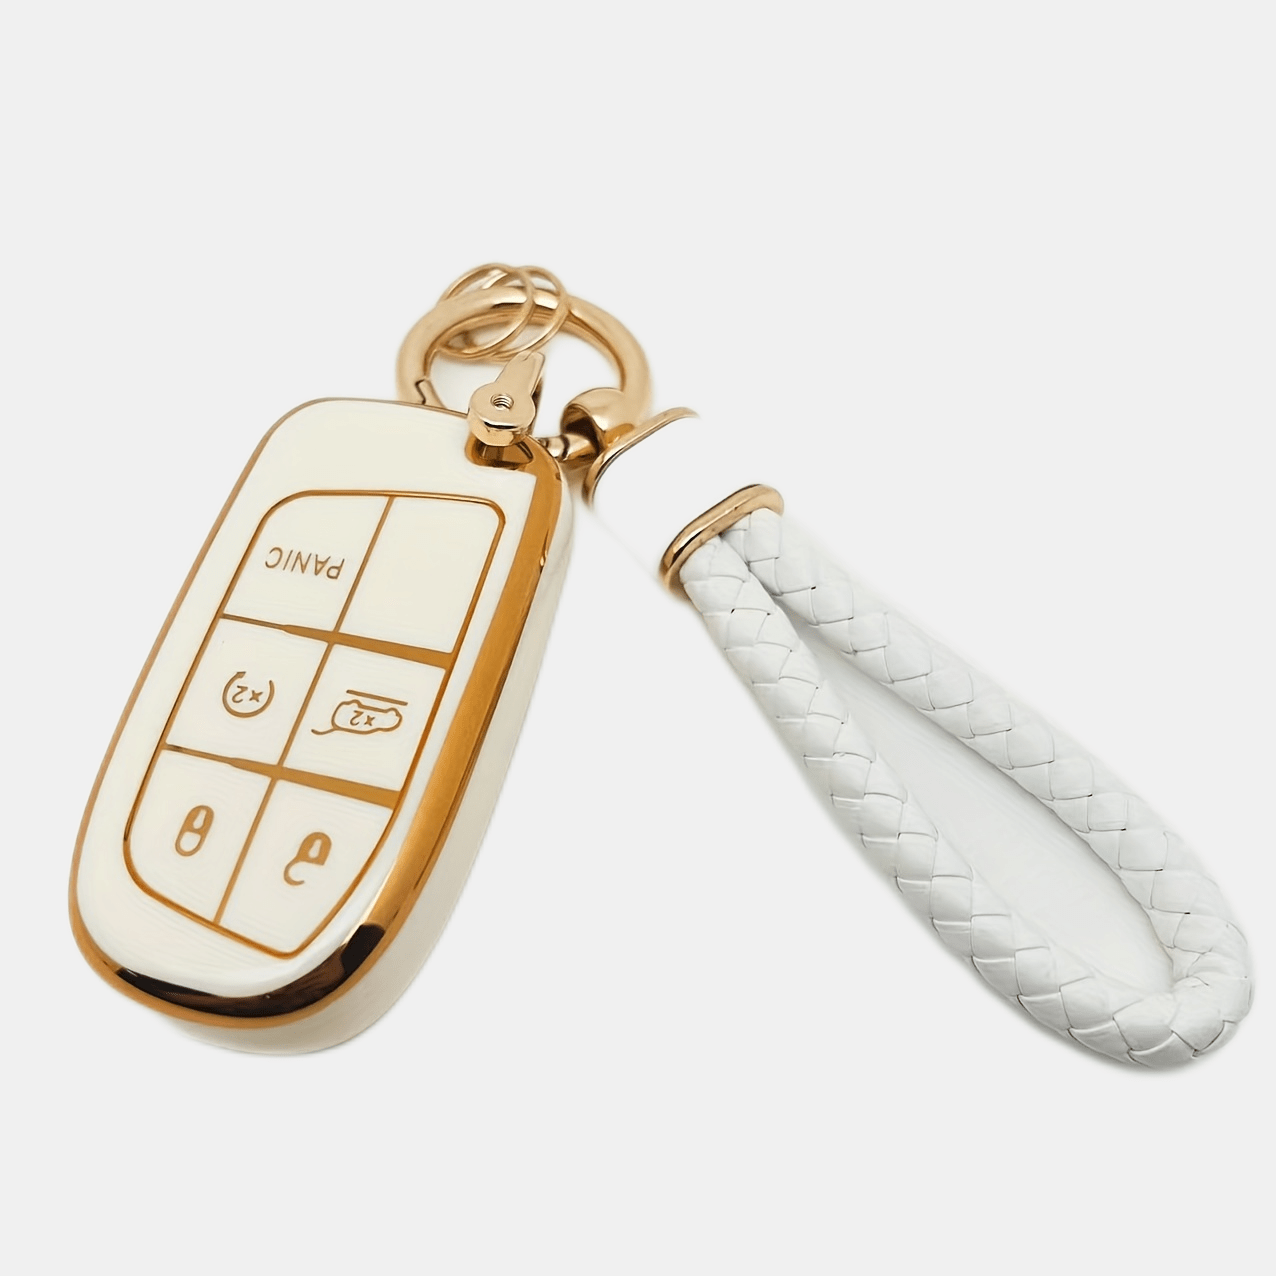 for Jeep Key Fob Cover Keycover Soft TPU Keys Shells Keychain Full Covers  Protector Case Cute White Compatible with Jeep Grand Cherokee Compass